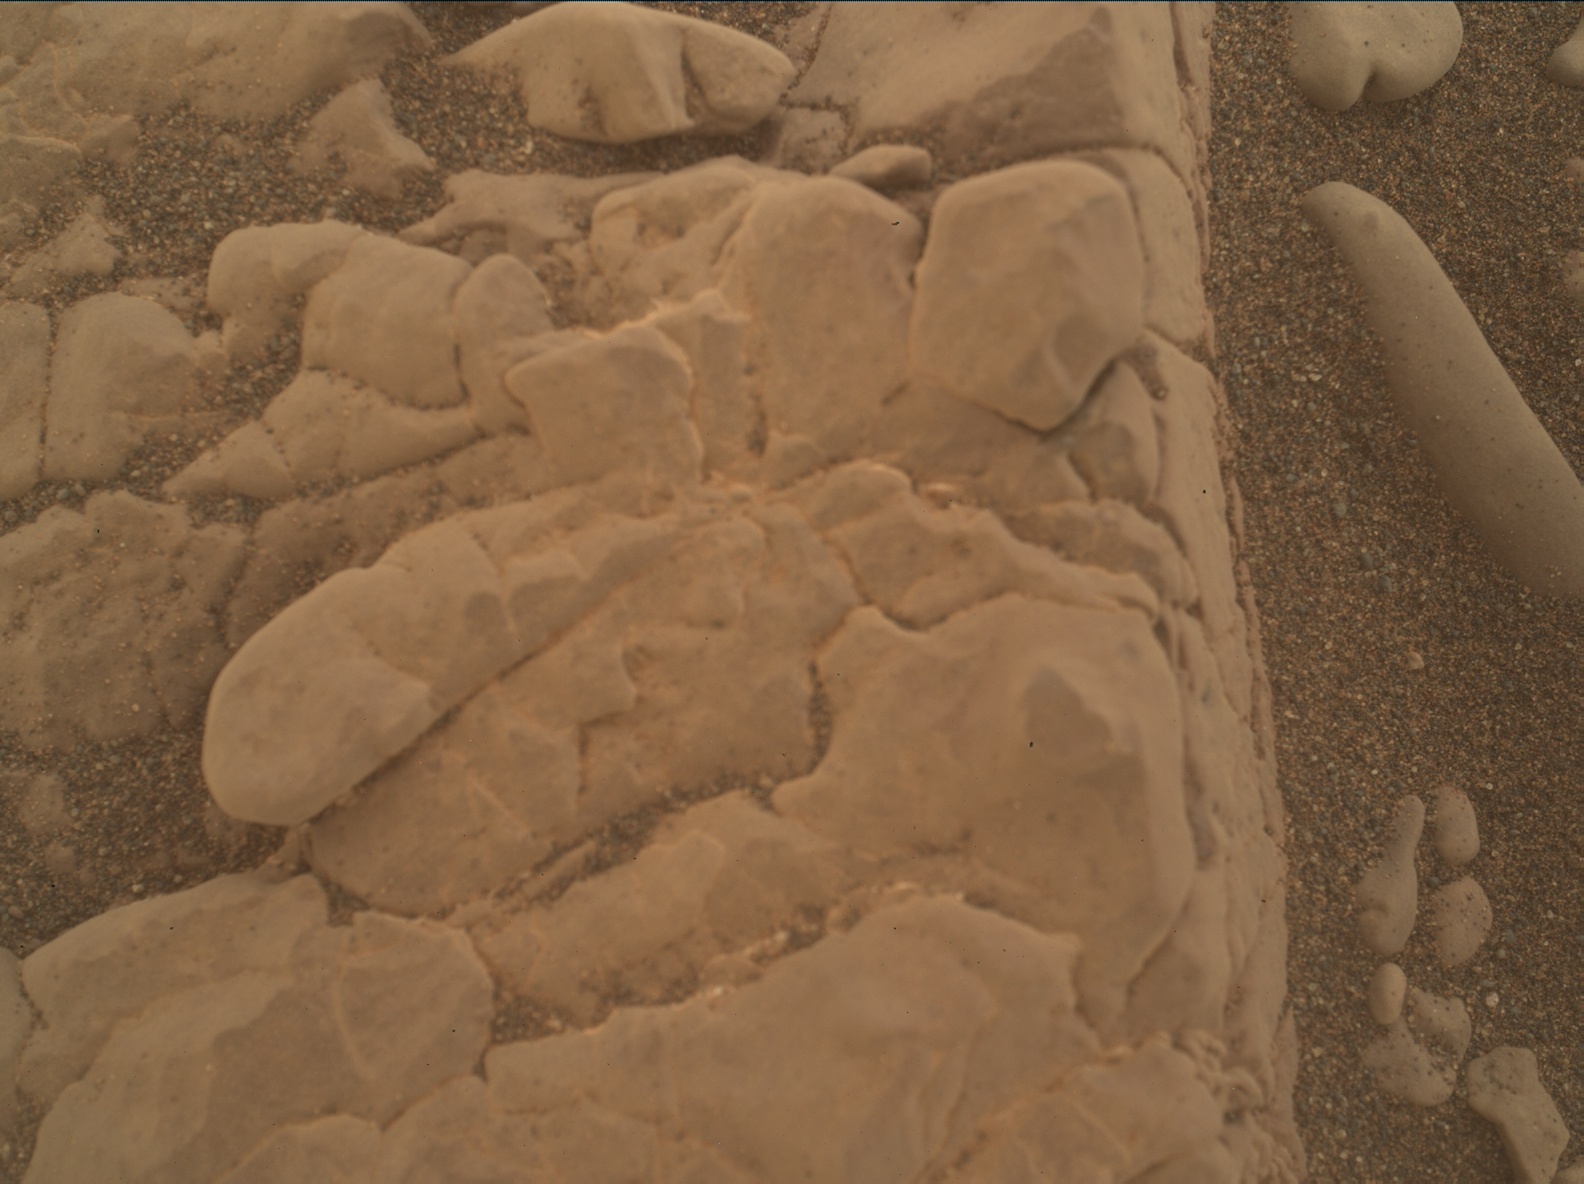 Nasa's Mars rover Curiosity acquired this image using its Mars Hand Lens Imager (MAHLI) on Sol 2967